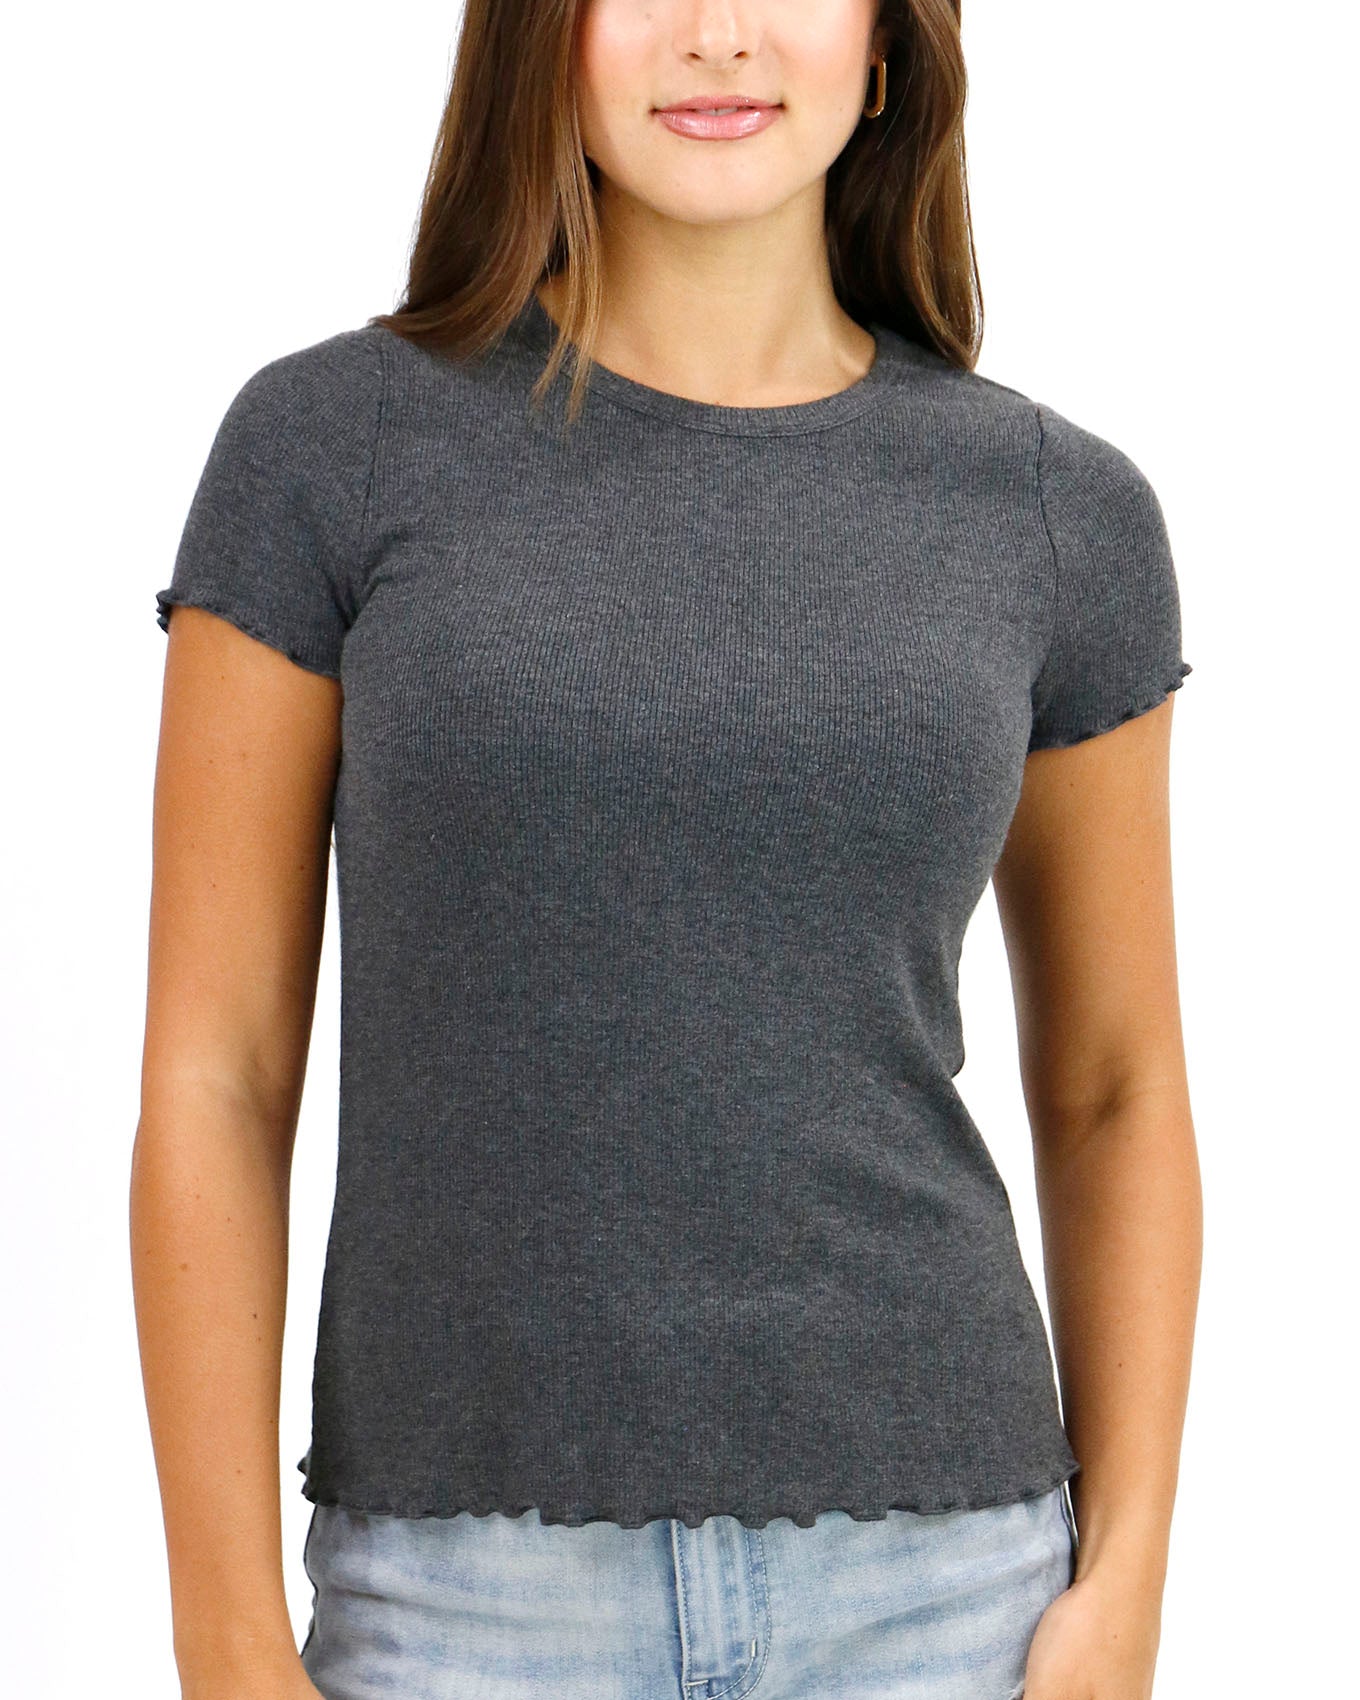 Ladies Scoop Neck, Womens Fitted Shirt